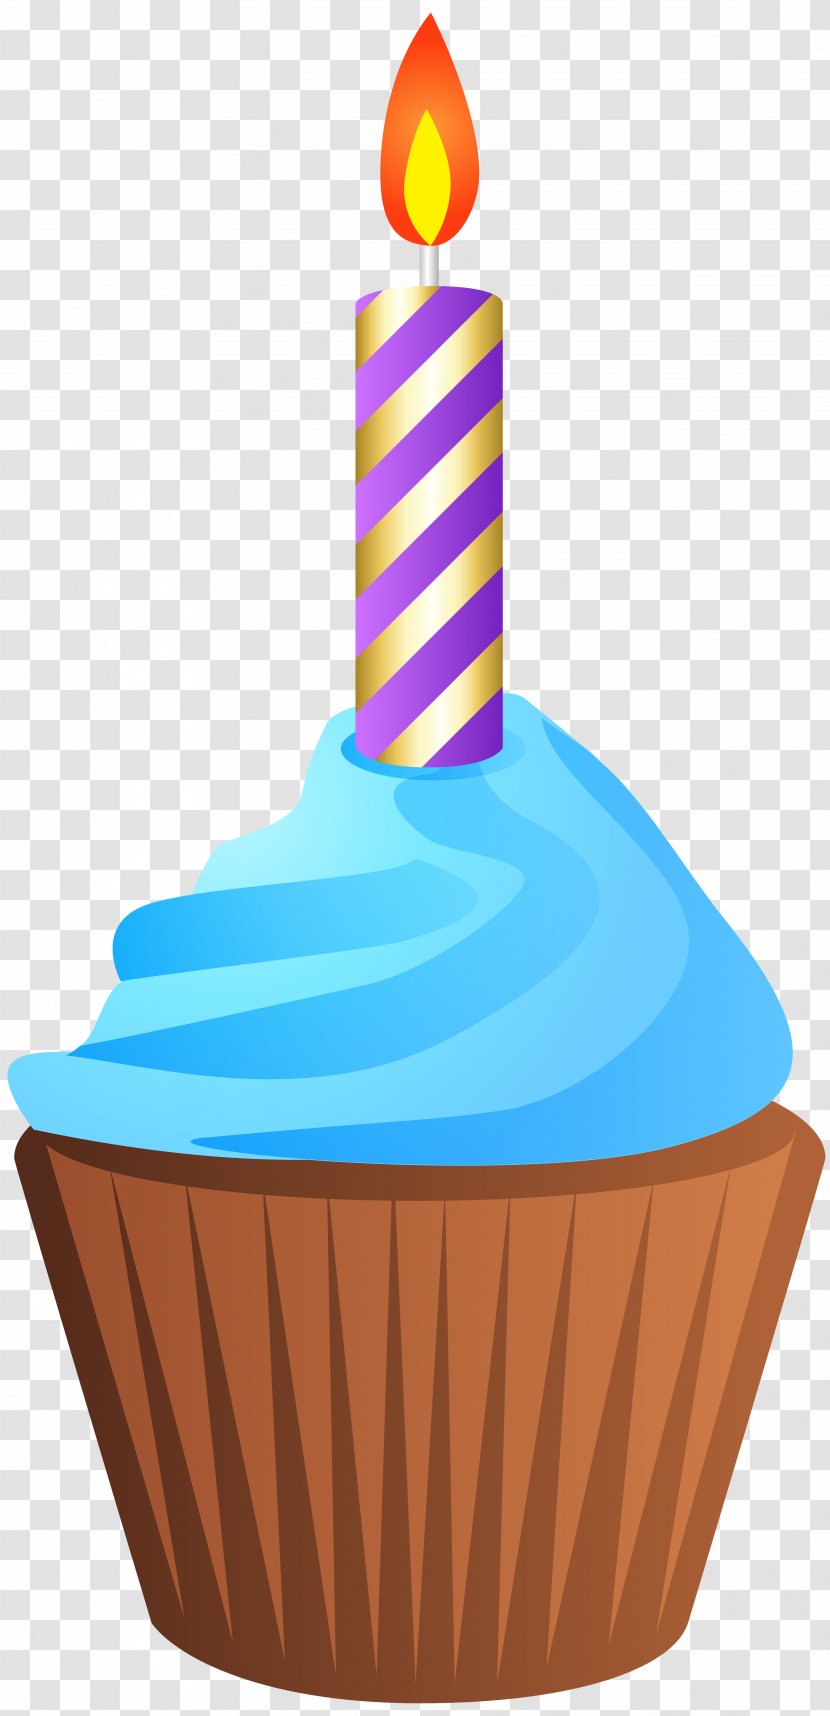 Birthday Cake Muffin Cupcake Clip Art - Candles Transparent PNG